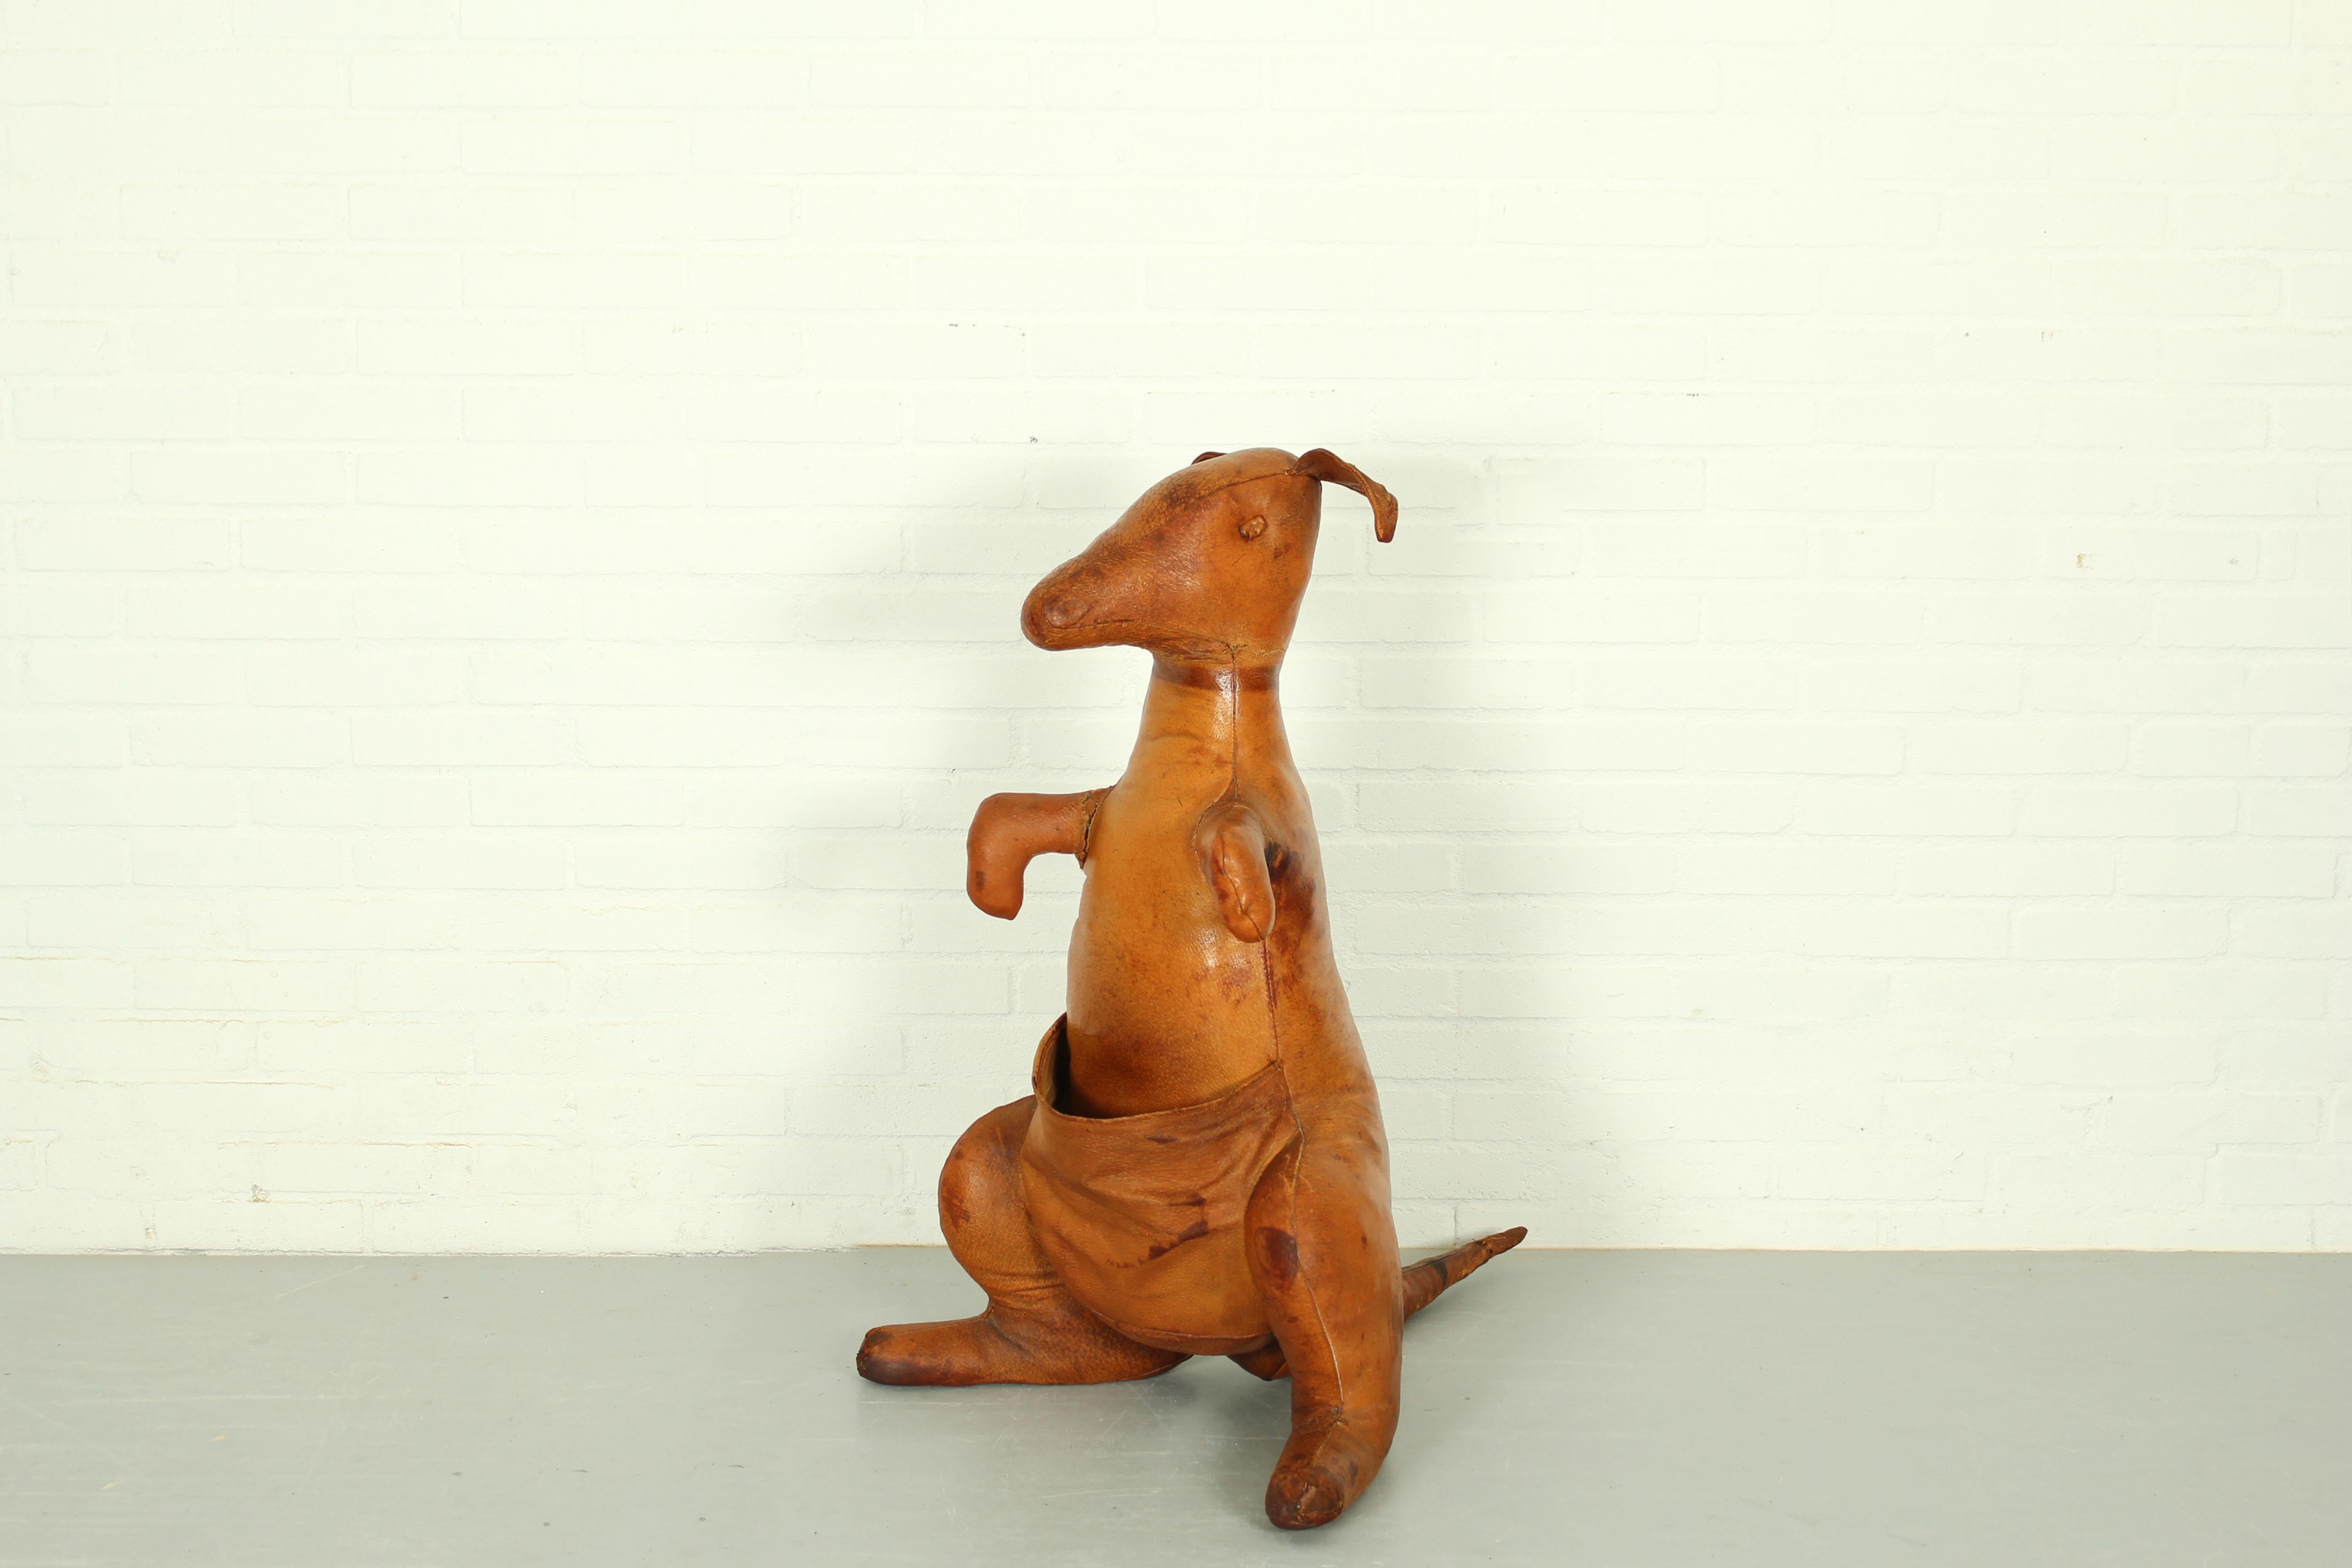 Leather Kangaroo Magazine Stand by Dimitri Omersa, England, 1960s For Sale 2